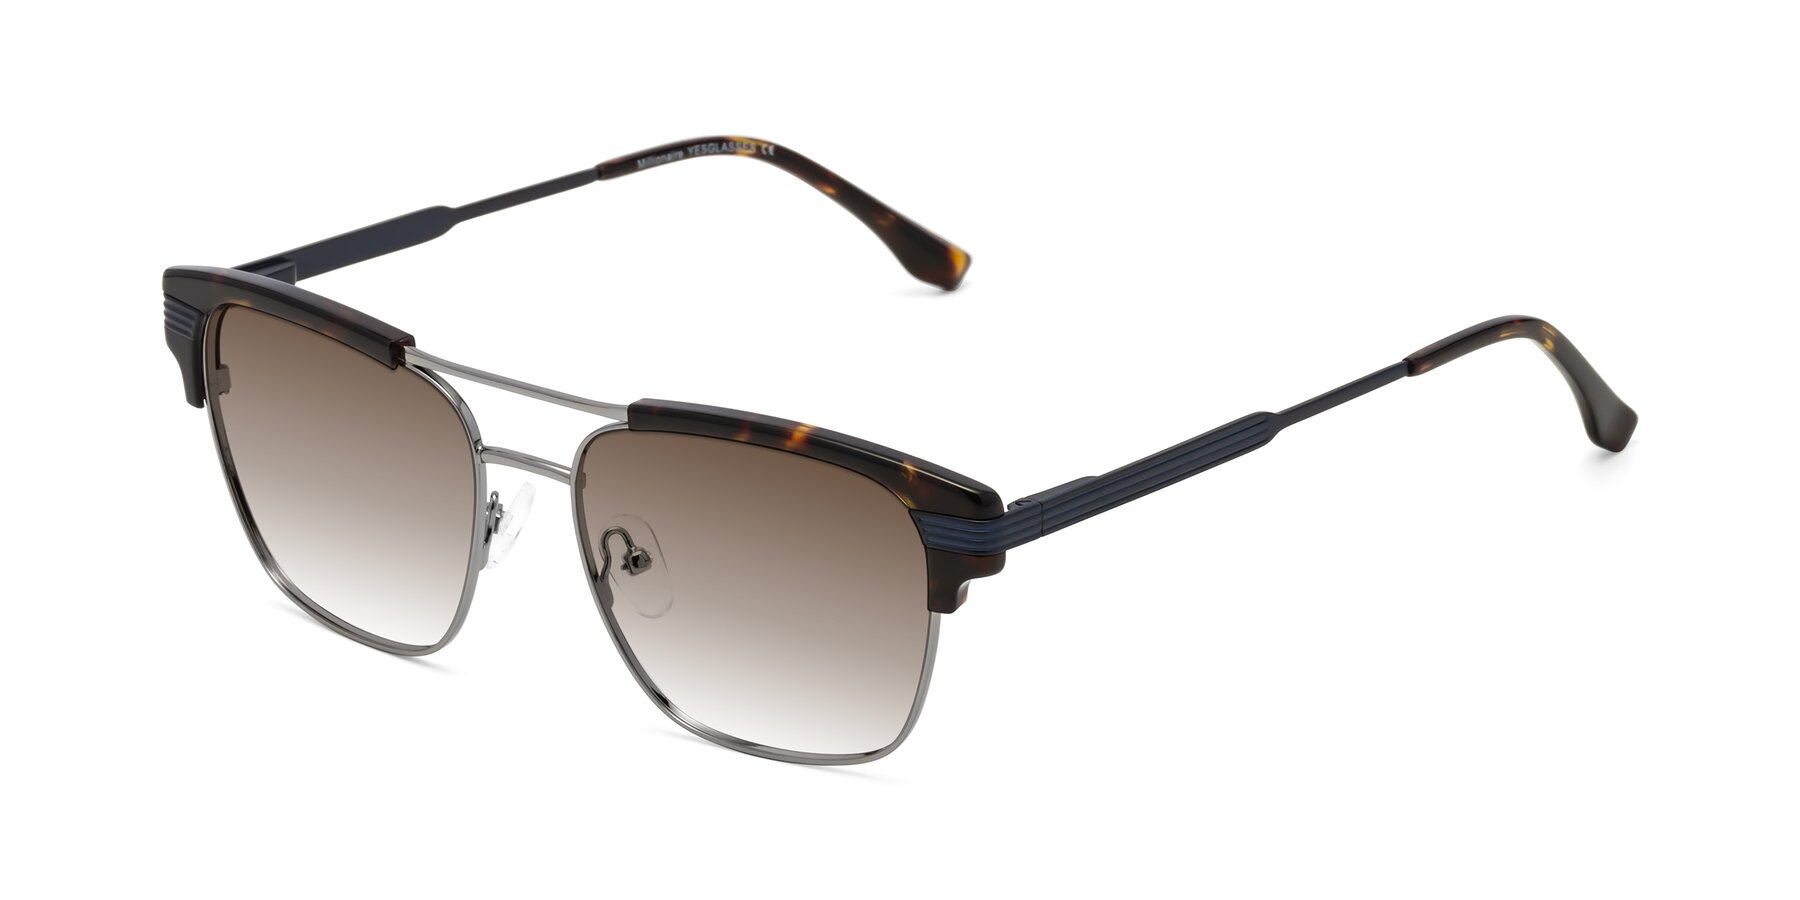 Angle of Millionaire in Tortoise-Gunmetal with Brown Gradient Lenses